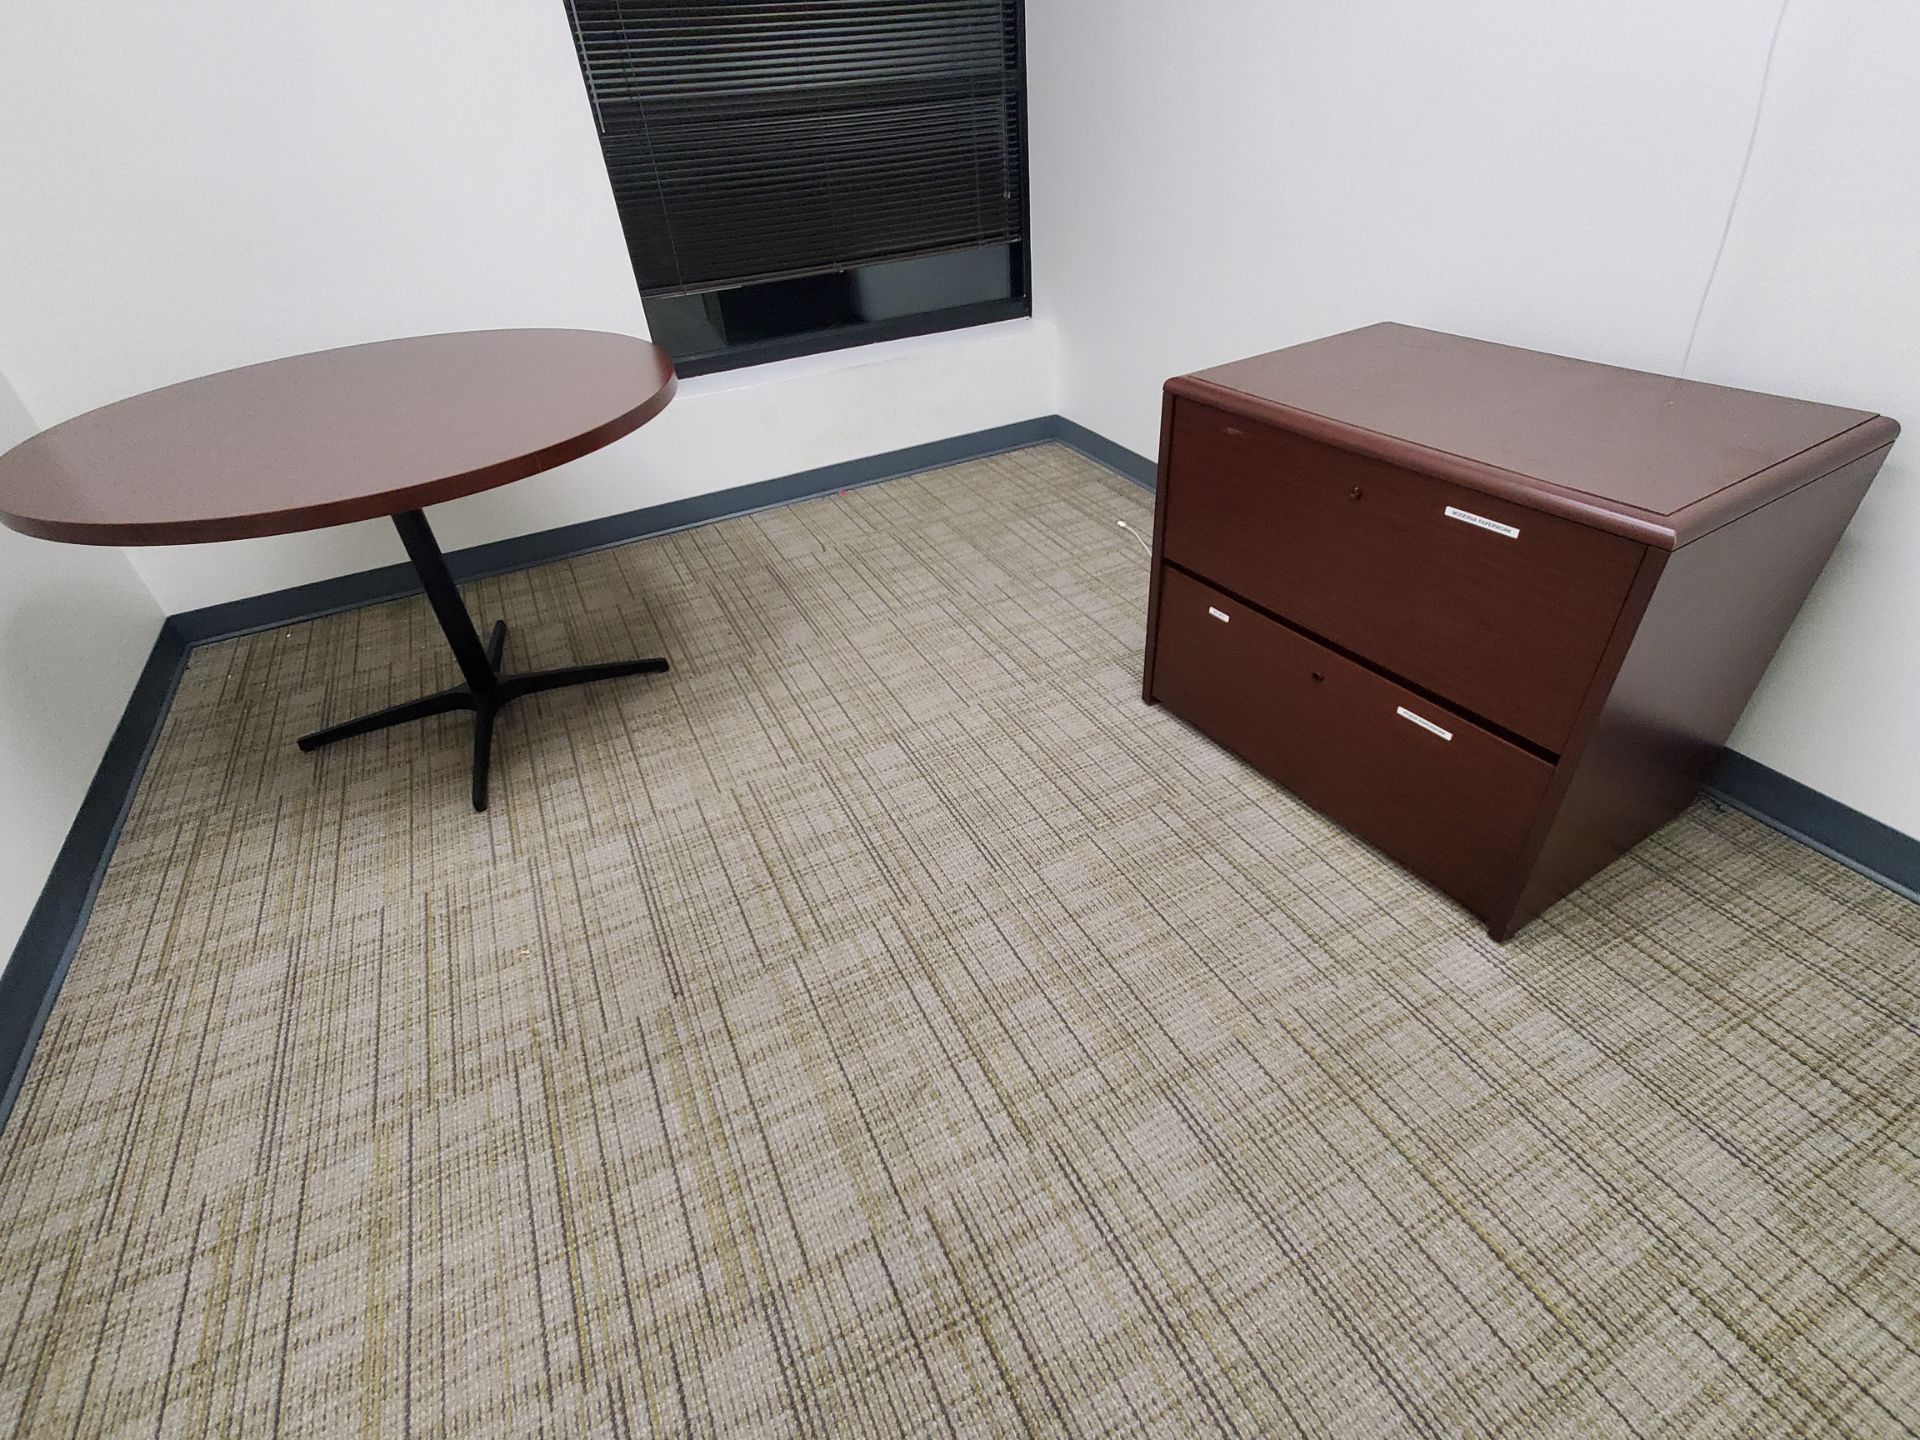 Furniture in Office (No Contents)